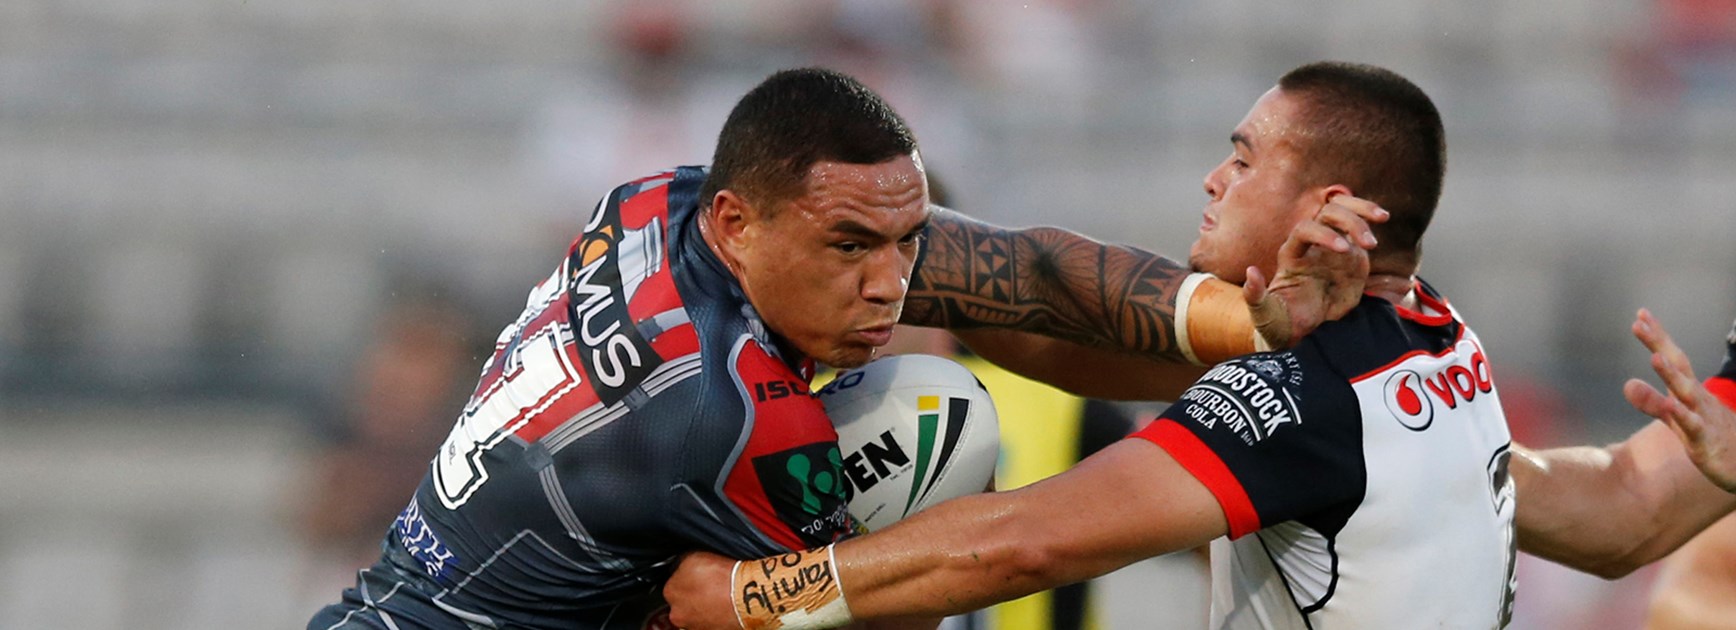 Dragons forward Tyson Frizell made 42 tackles and no missed tackles in Round 4 against the Warriors.